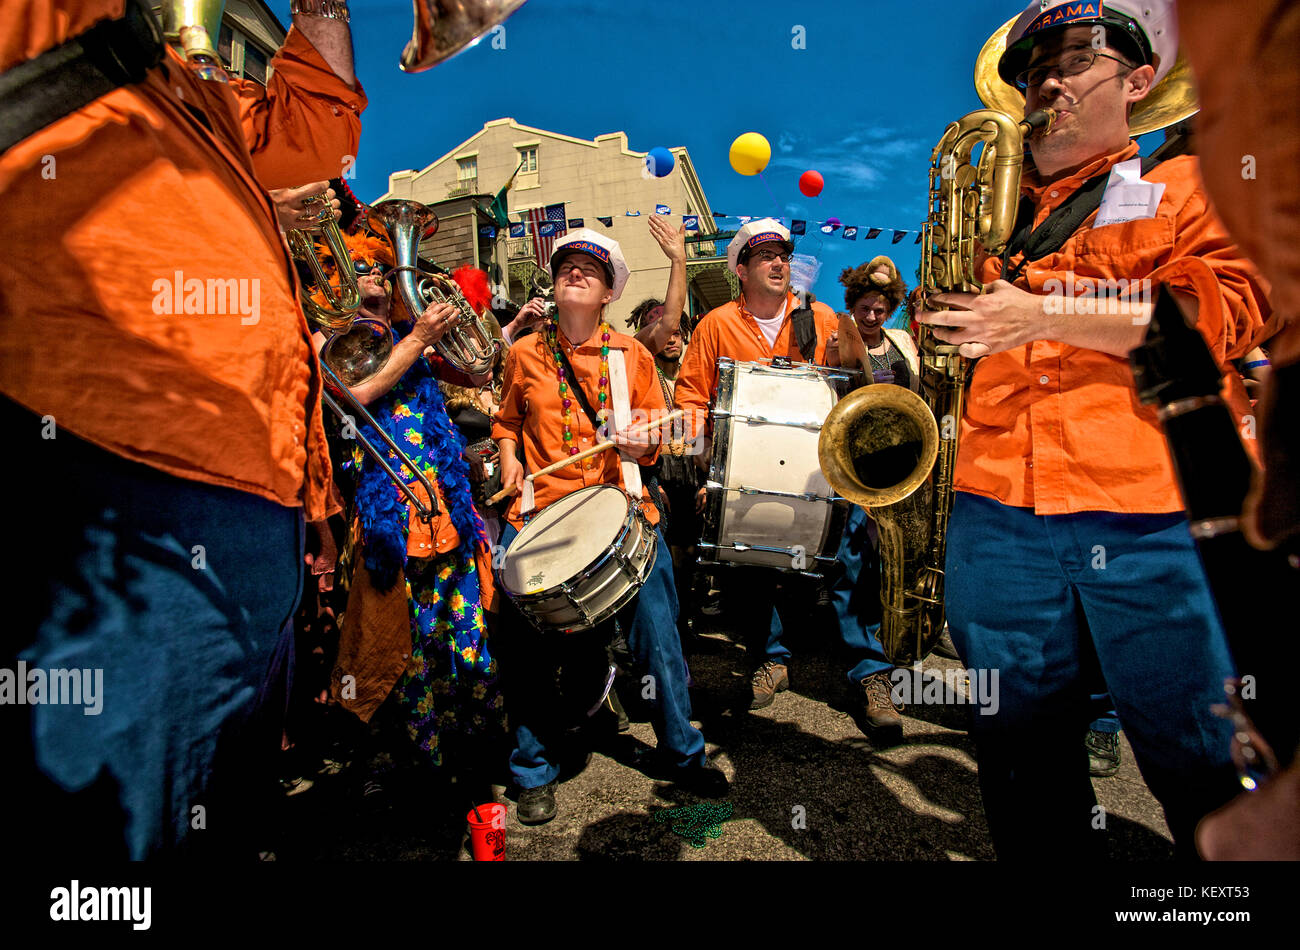 The Panorama Brass Band leads a second line parade on Mardi Gras Day in New Orleans, Louisiana Stock Photo